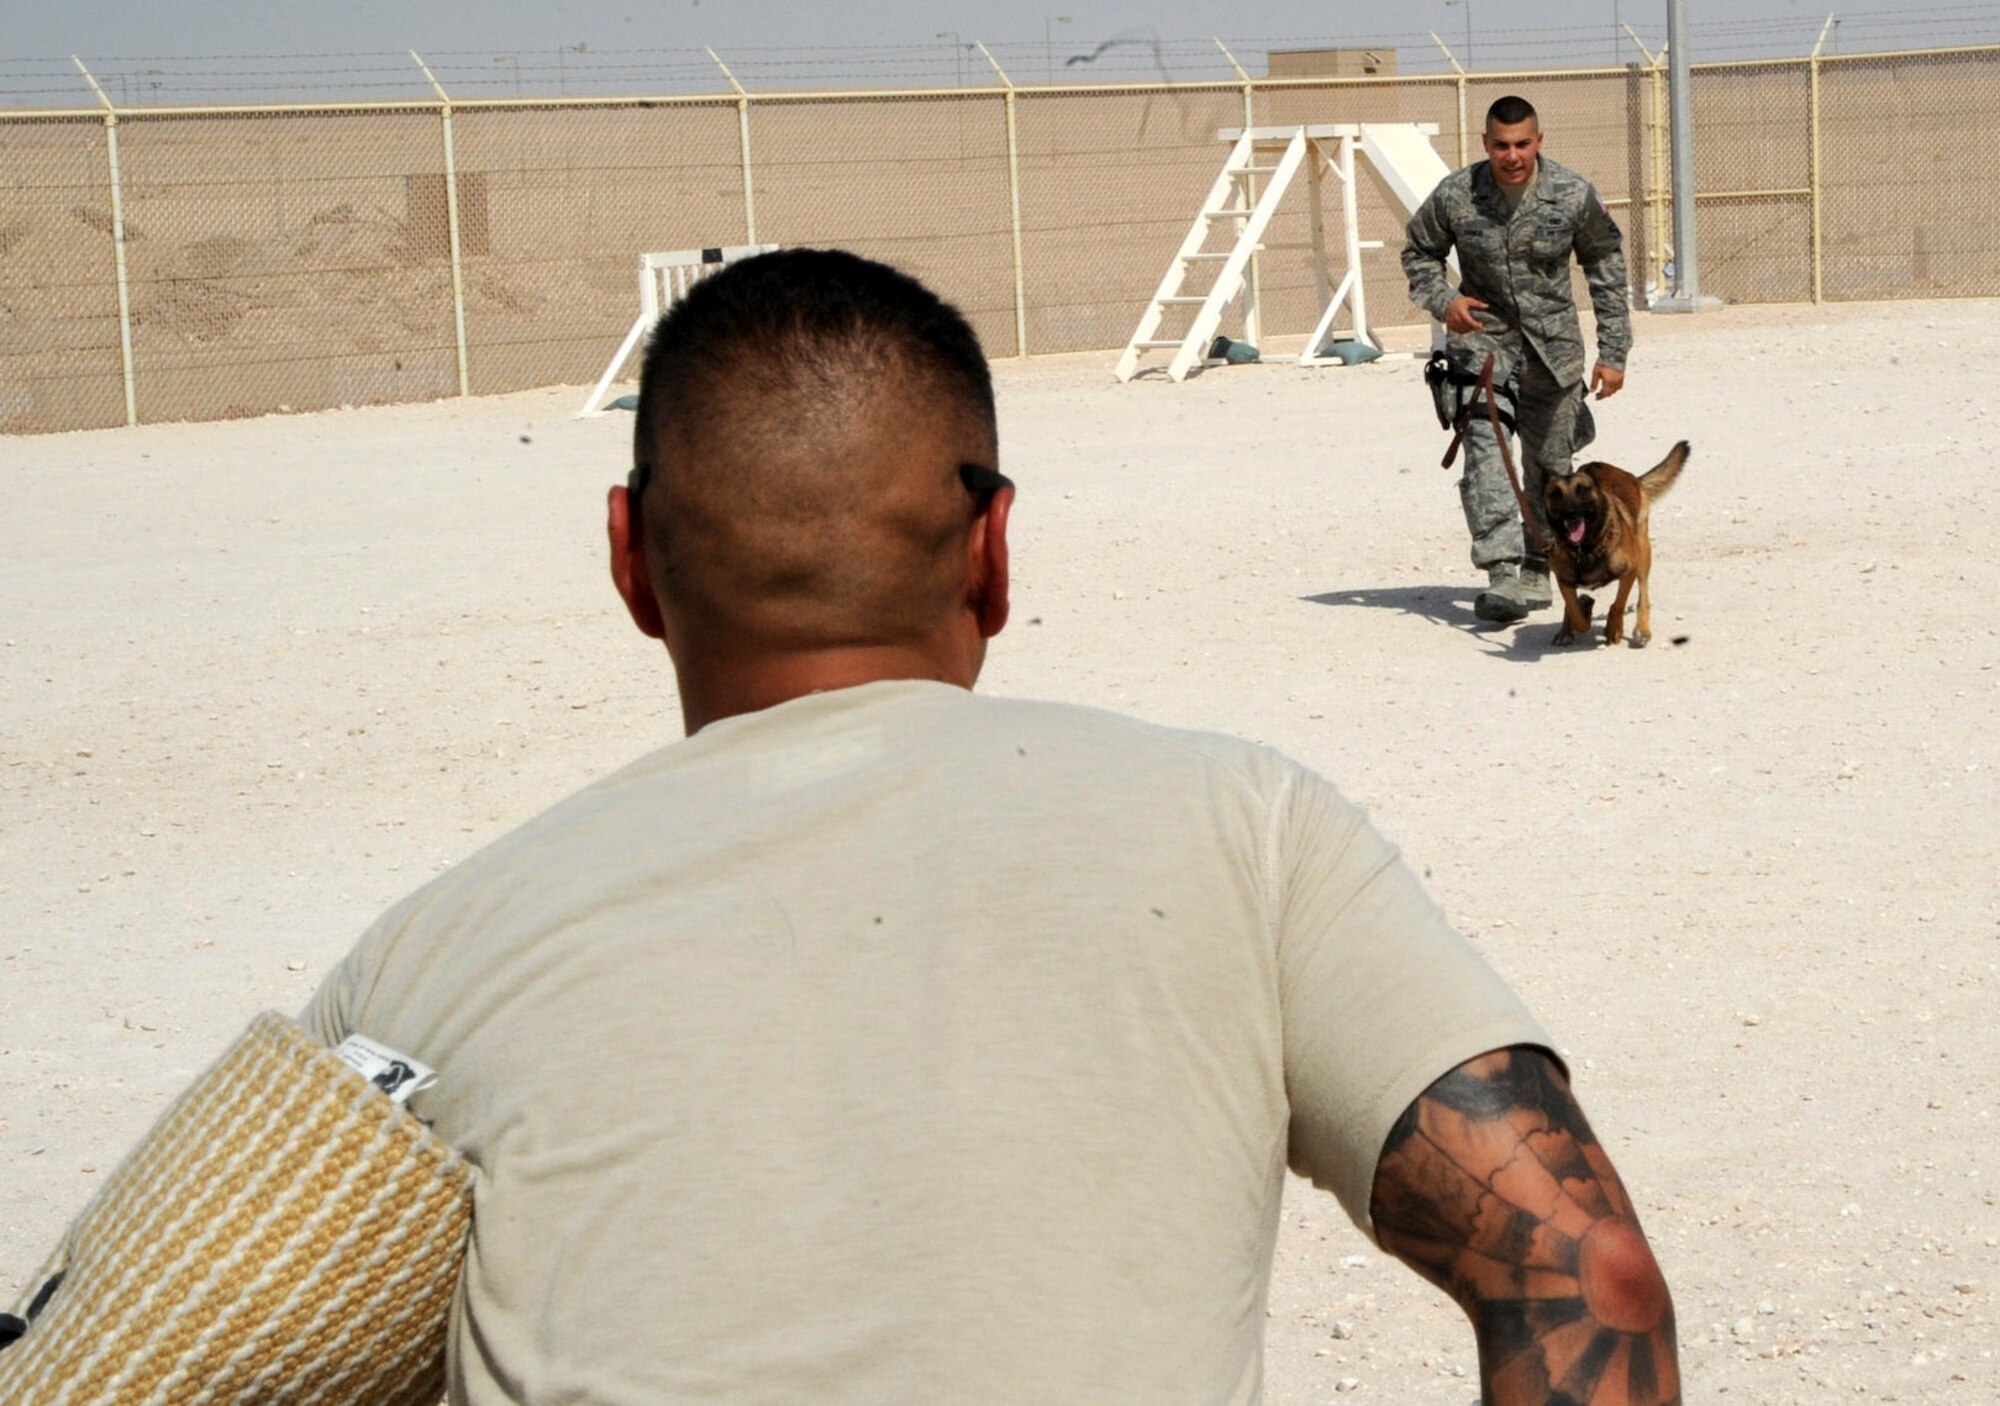 Senior Airman Andrew Hanus prepares to release Beni, onto Senior Airman Aaron Escalante during training at the 379th Air Expeditionary Wing in Southwest Asia, June 26, 2013. Hanus is a 379th Expeditionary Security Forces Squadron military working dog handler and Beni a 379th ESFS MWD both deployed from Travis Air Force Base, Calif. Escalante is a 379th ESFS MWD handler deployed from Davis-Monthan Air Force Base, Ariz. (U.S. Air Force photo/Senior Airman Bahja J. Jones) 